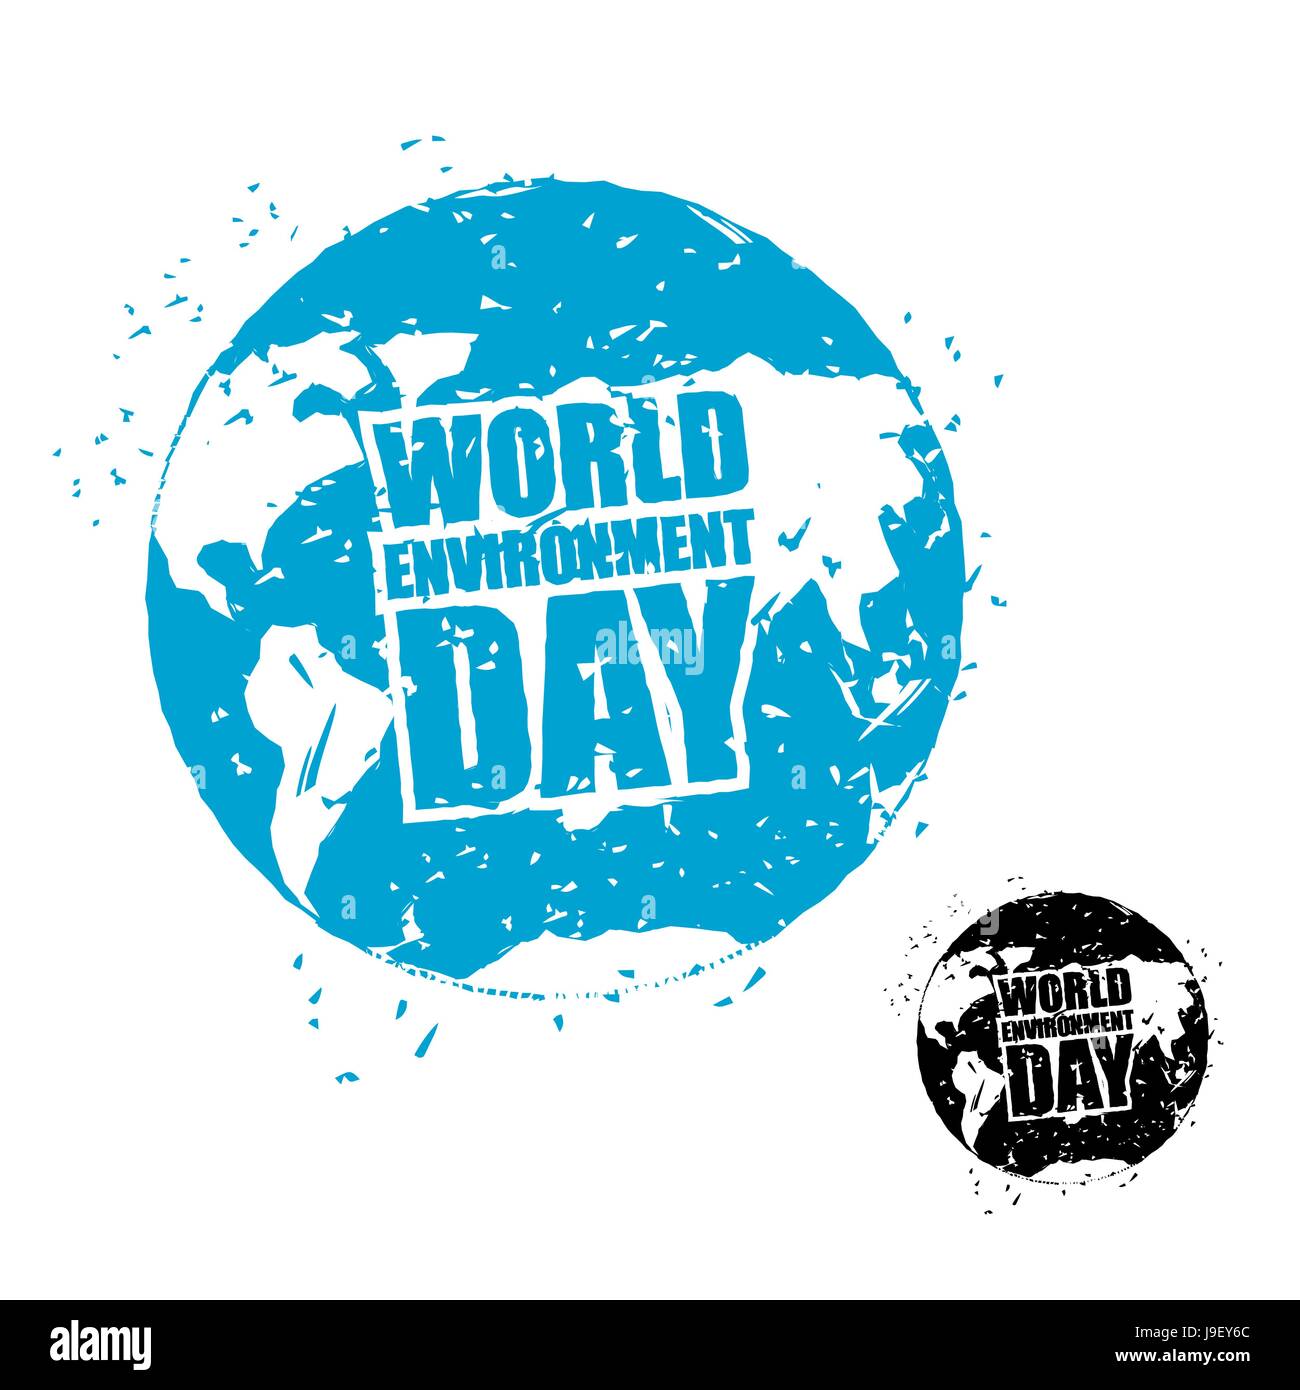 World Environment Day. Earth in grunge style. emblem of planet earth. International holiday nature Stock Vector